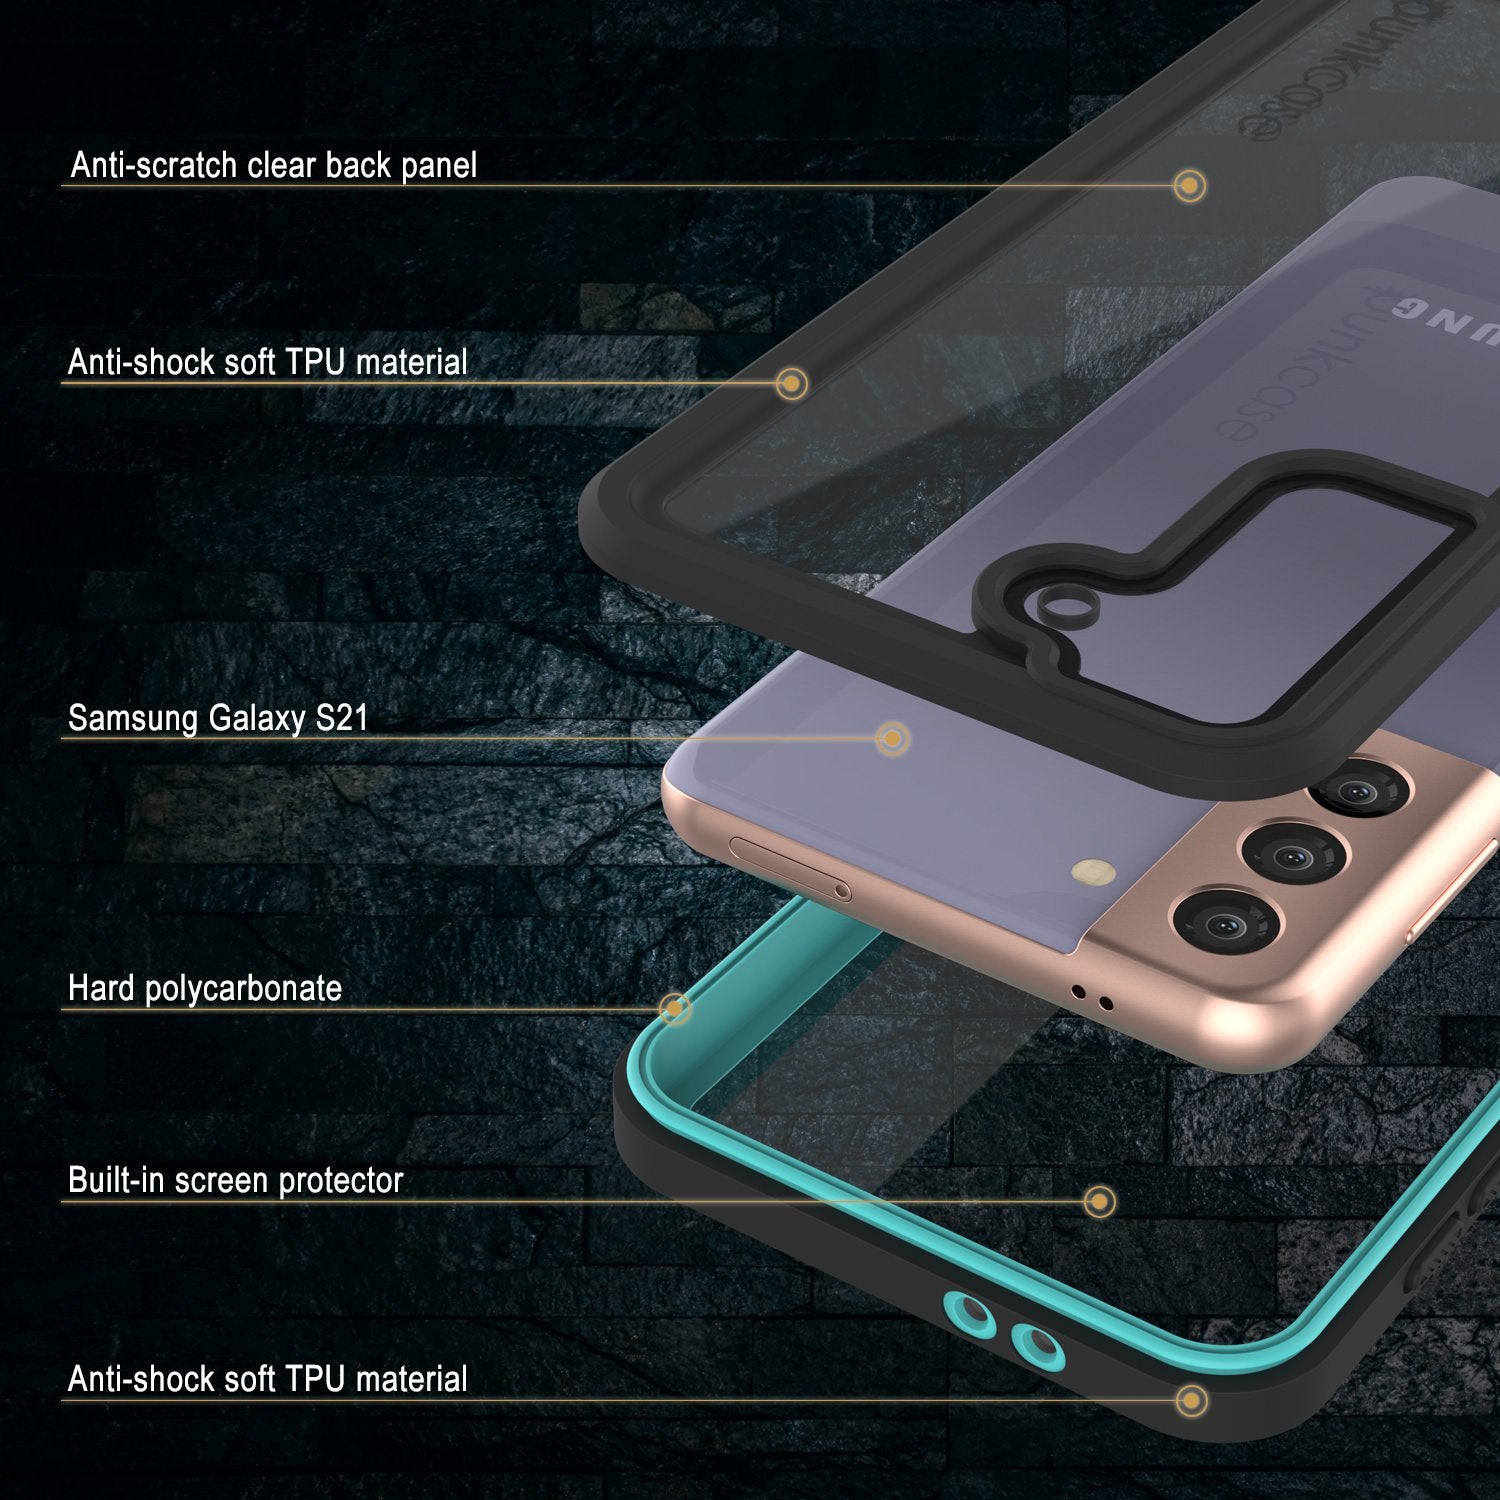 Galaxy S21 Water/Shock/Snowproof [Extreme Series]  Screen Protector Case [Teal]